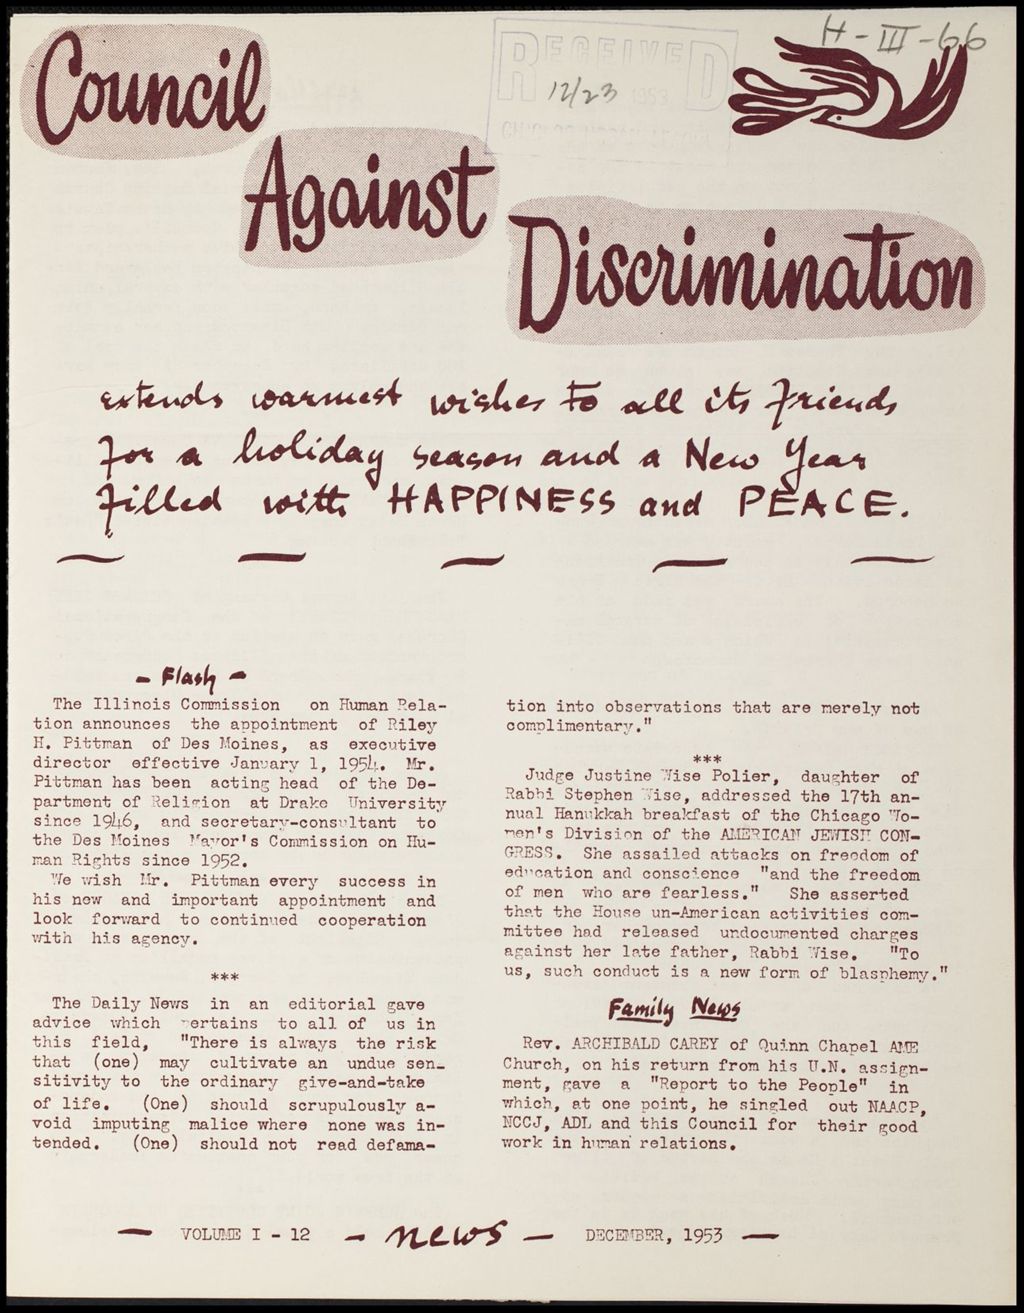 Miniature of Chicago Council Against Racial and Religious Discrimination newsletters and publications, 1953-1954 (Folder I-2641)